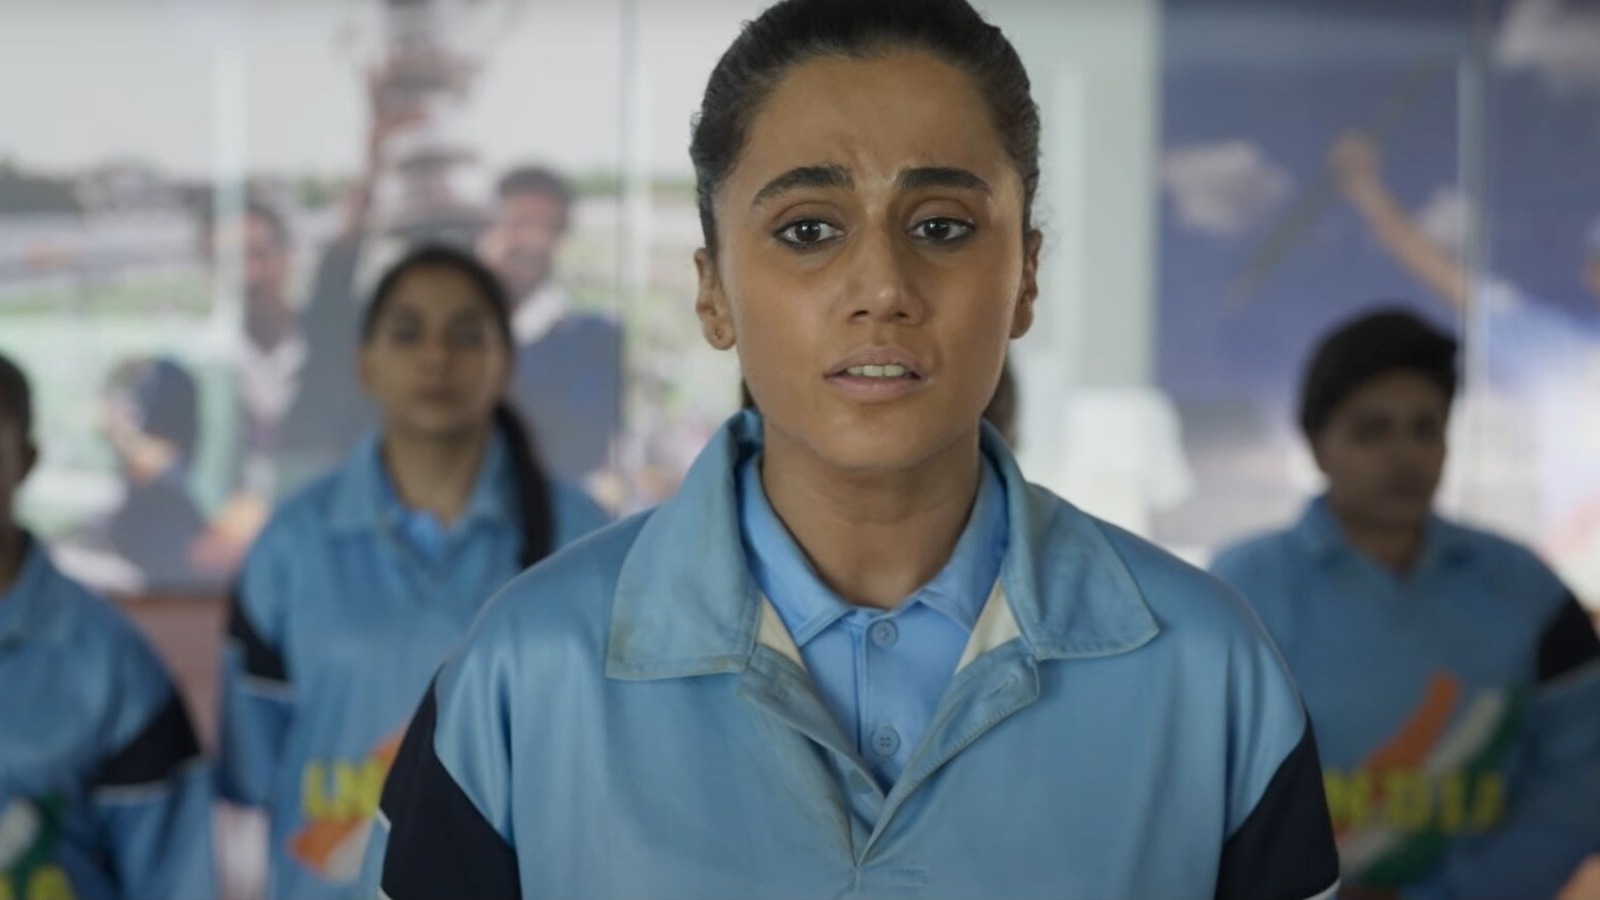 Shabaash Mithu trailer: Taapsee Pannu is convincing as Mithali Raj in gripping tale about rise of legendary cricketer